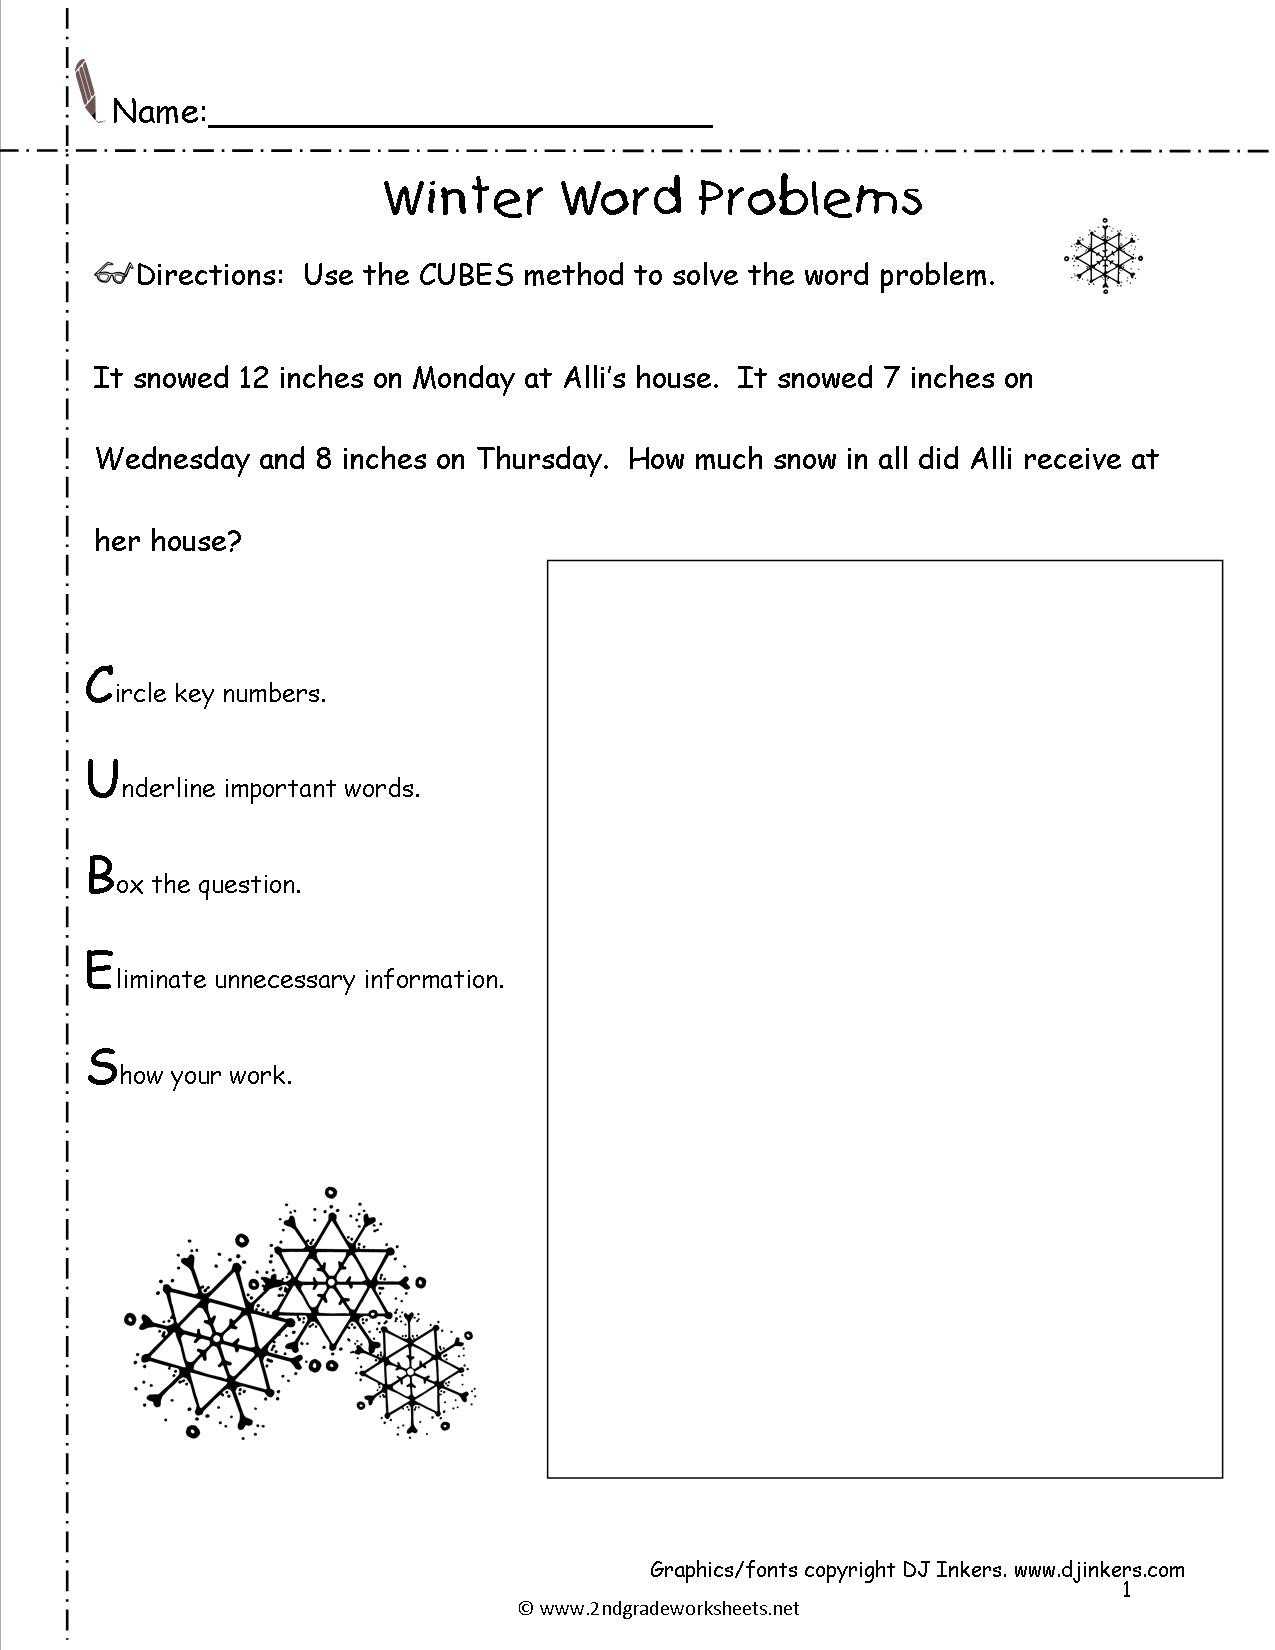 7th Grade English Worksheets together with Science Worksheets for 2nd Grade Image Collections Worksheet for